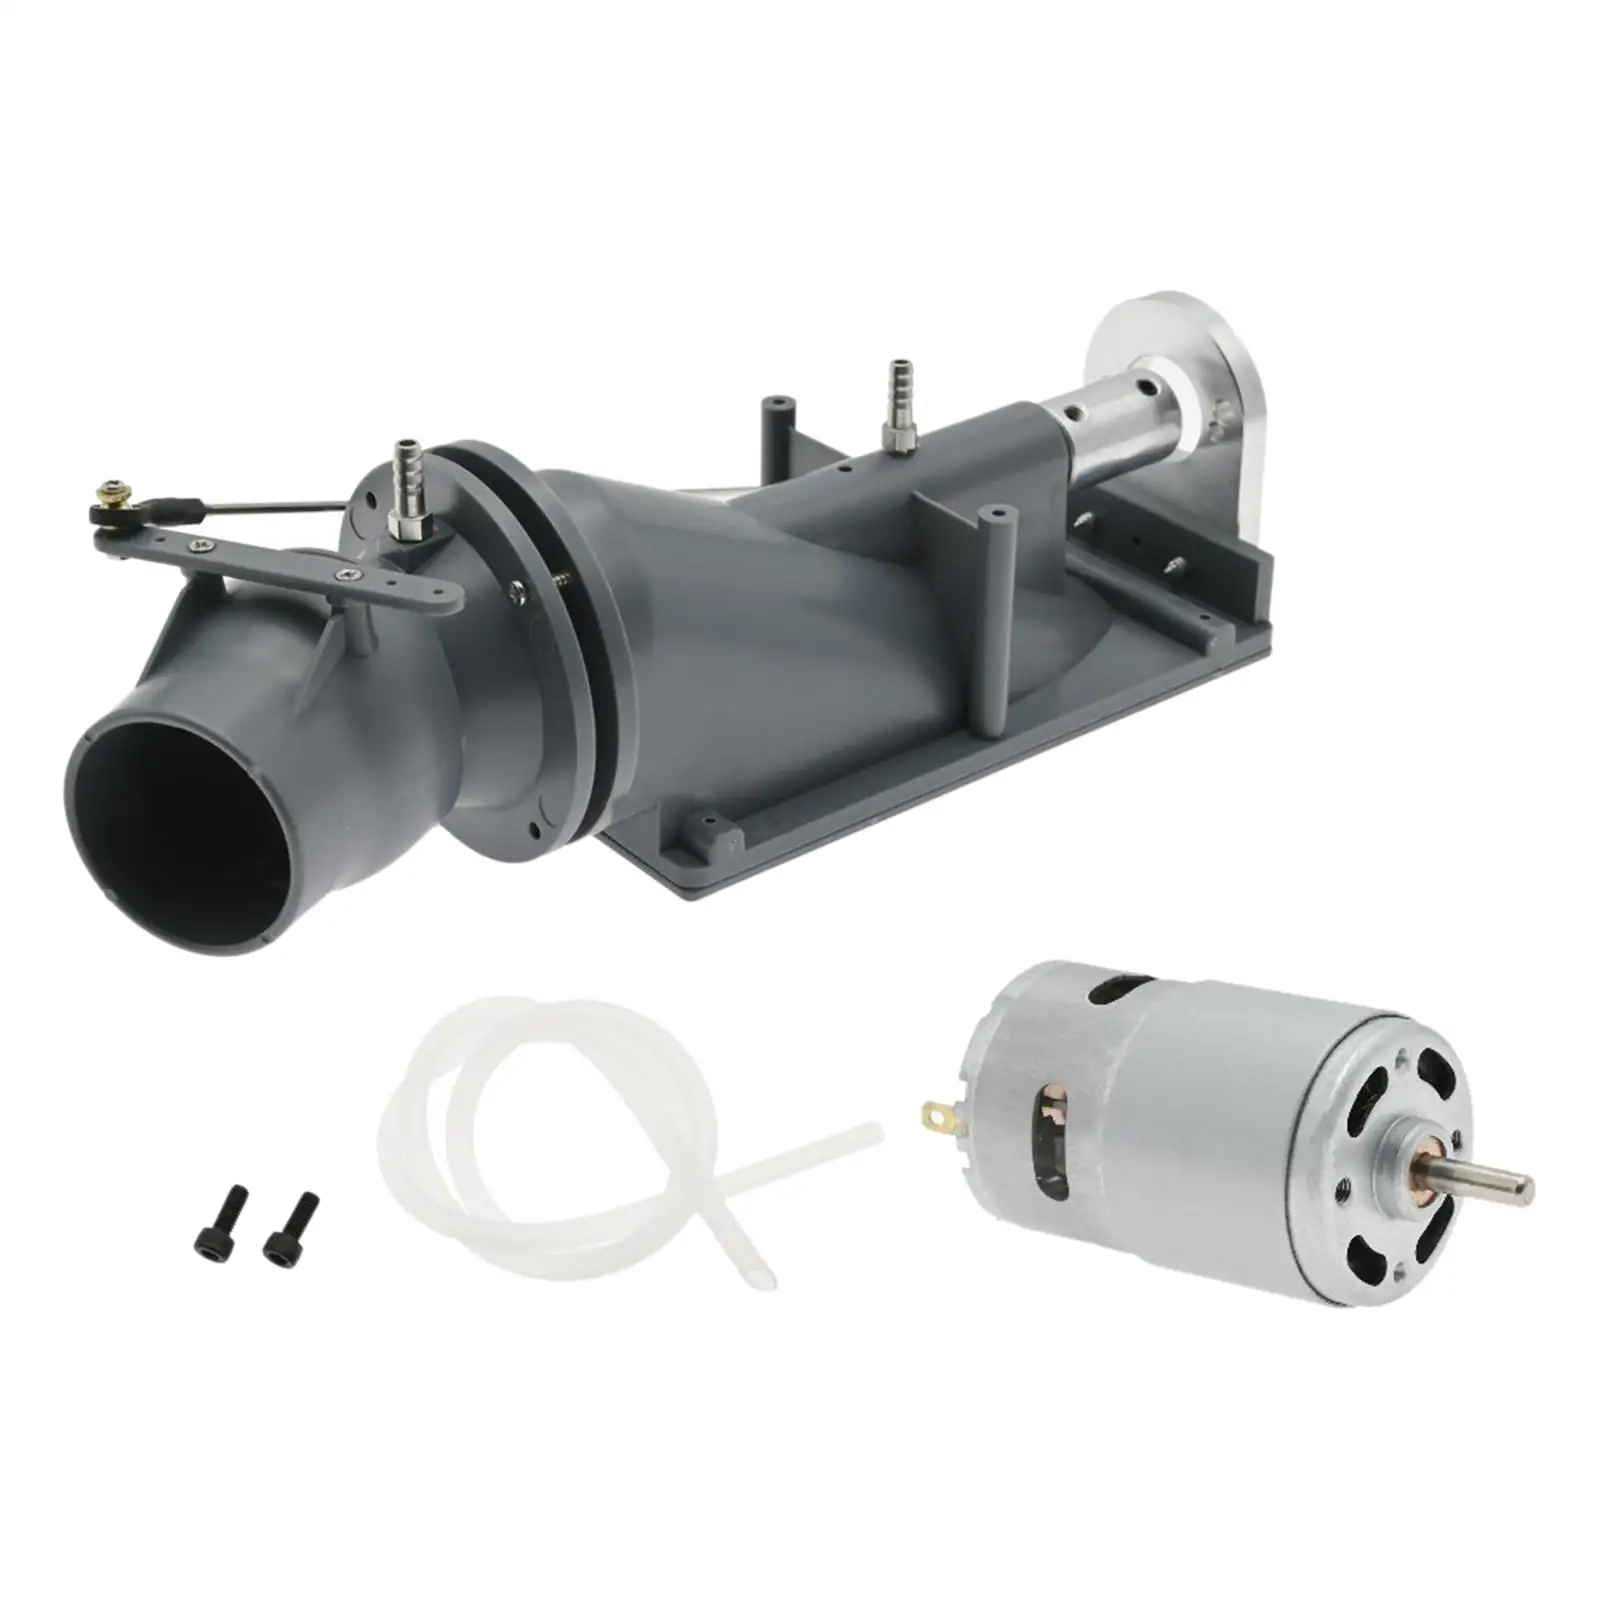 40mm Water Jet Thruster Boat Pump Spray with 775 Motor Boat Pump Spray Thruster for RC Jet Boat Replaces Accessories